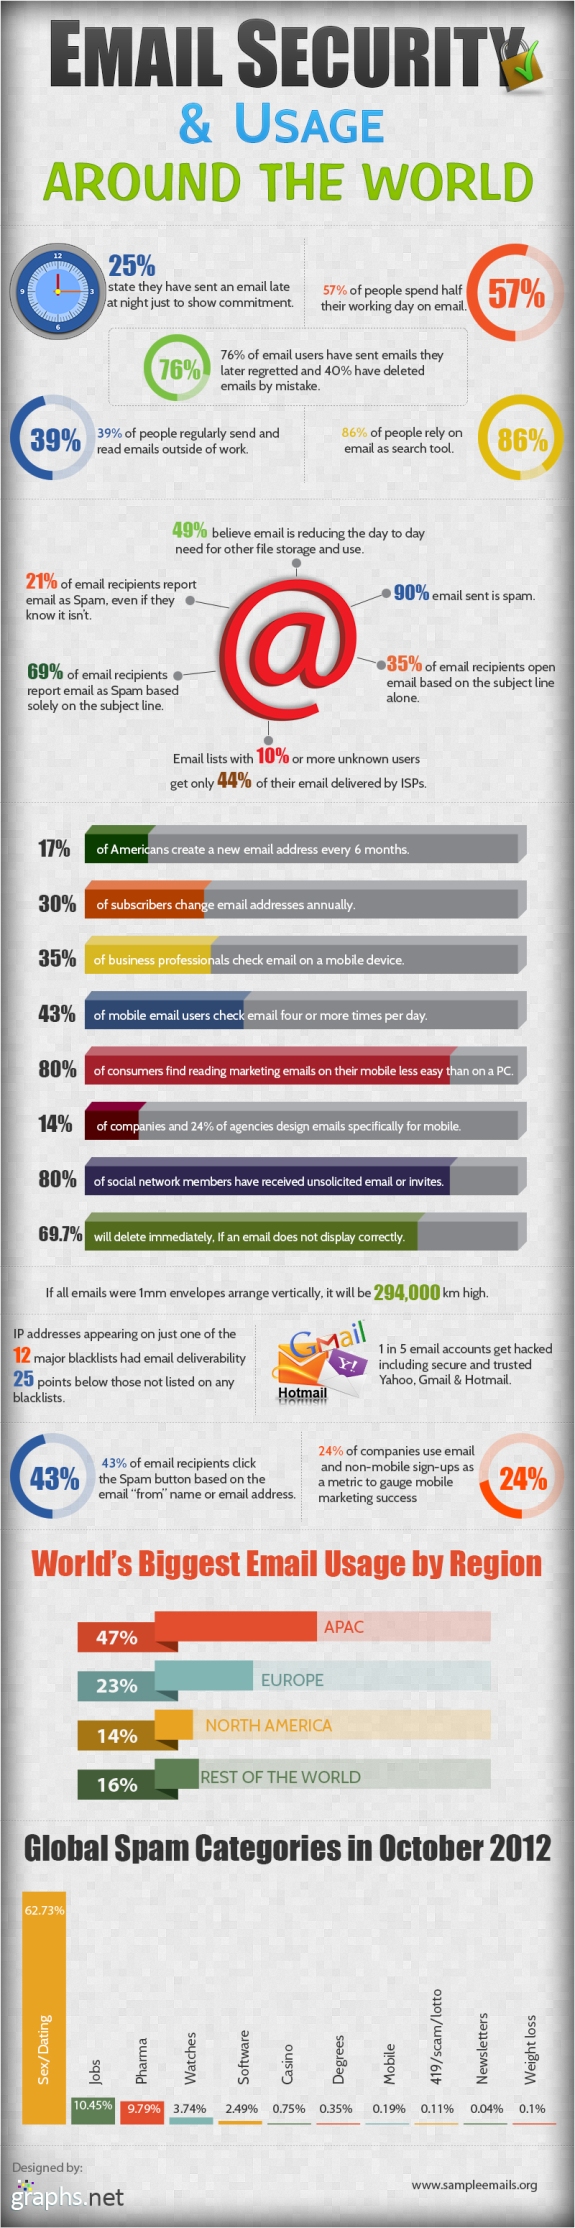 Email Security & Usage Around the World (Infographic)